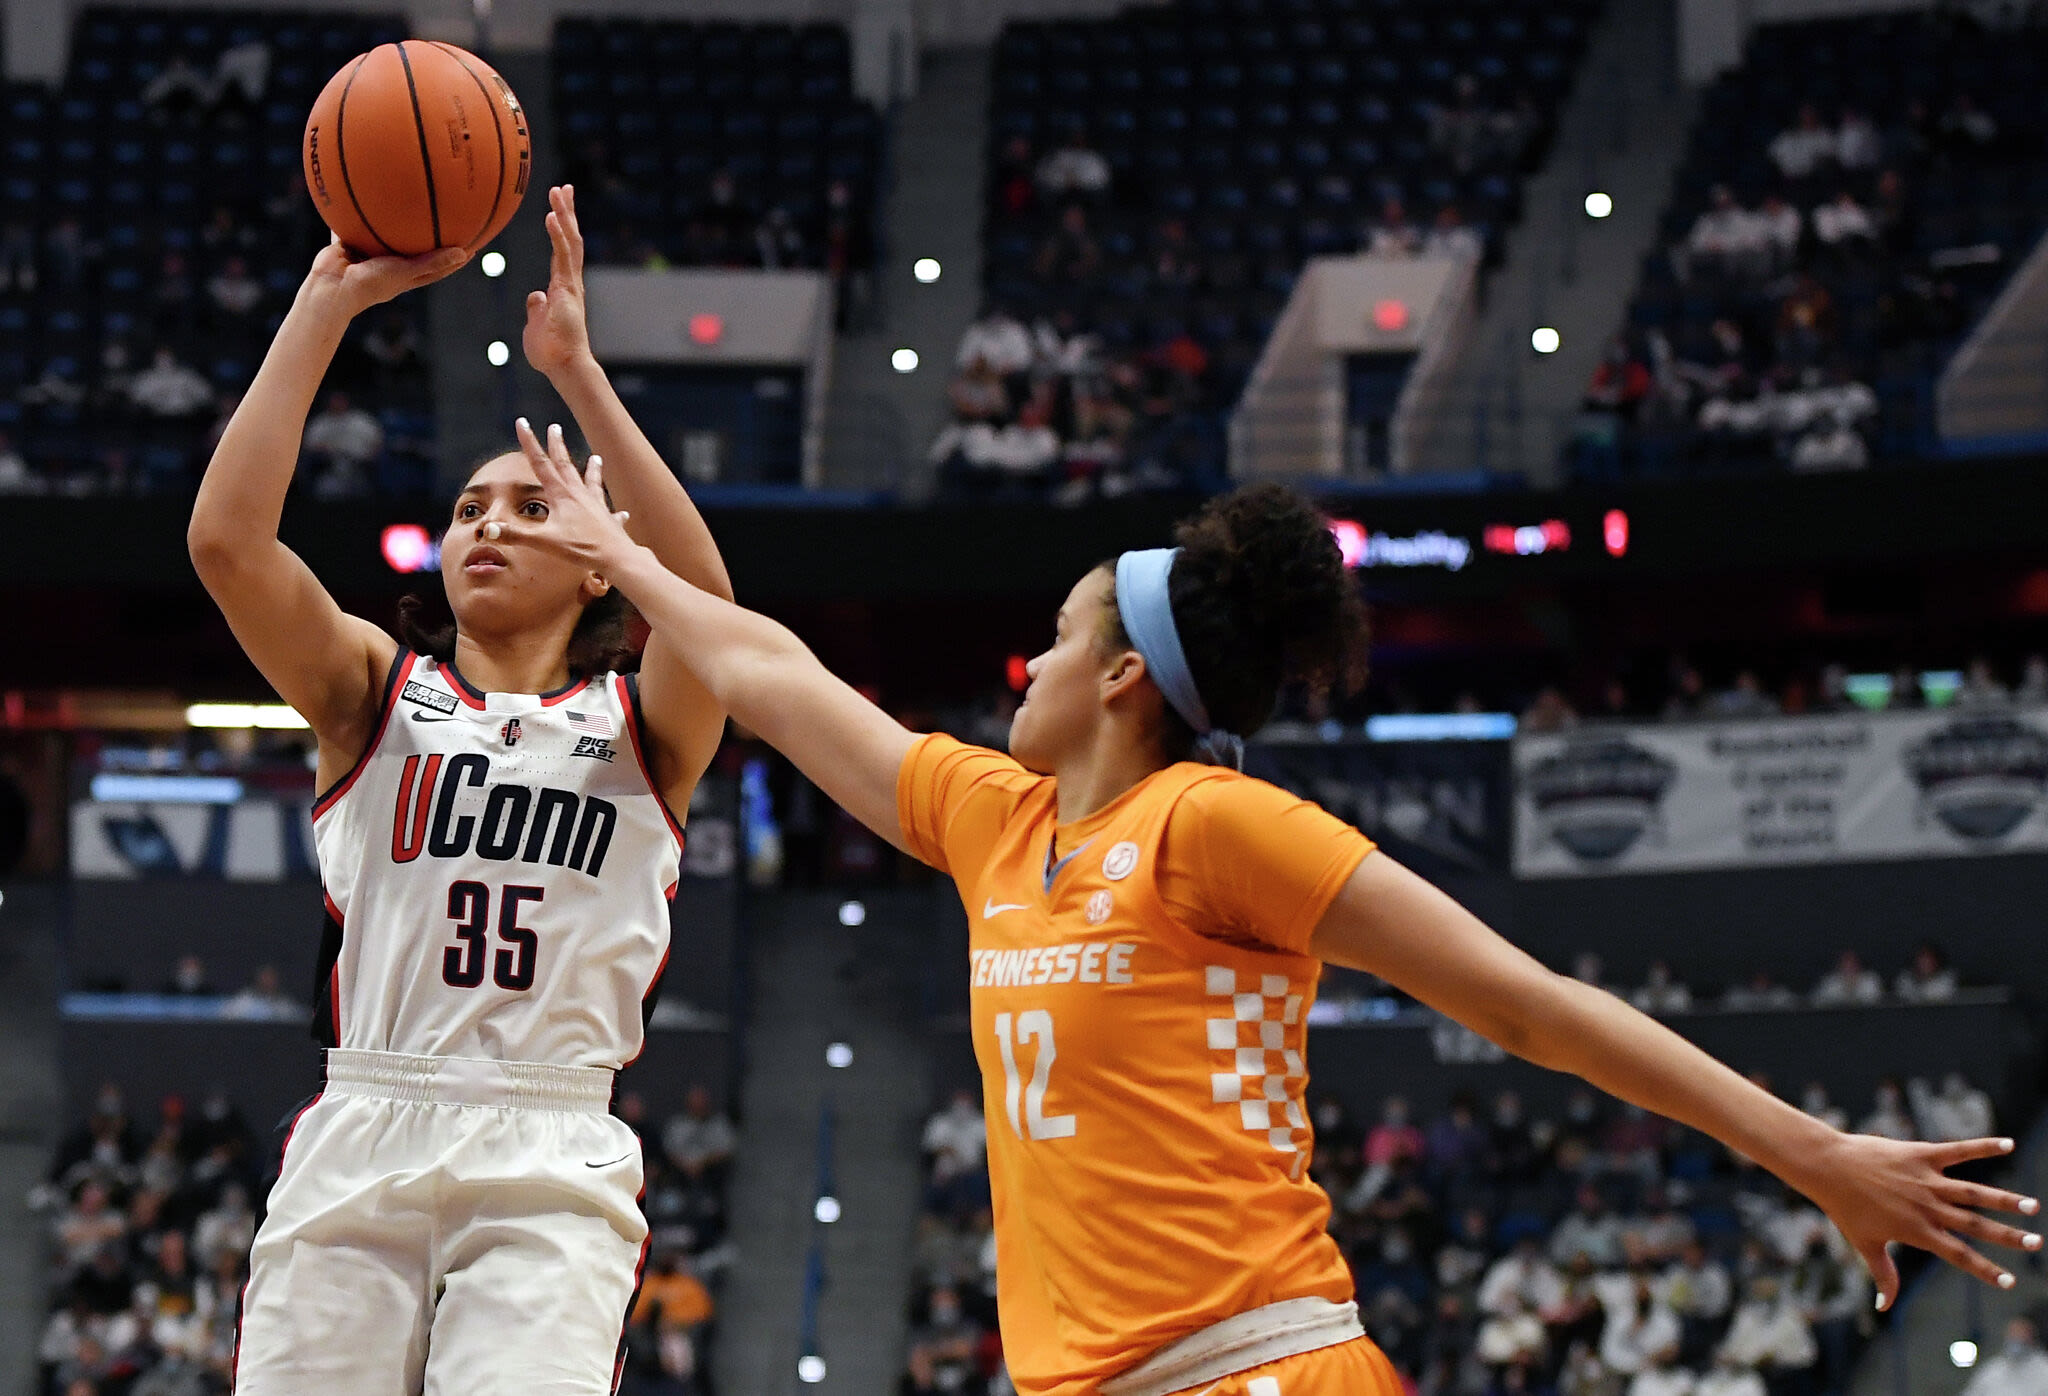 UConn women's basketball team to renew series with longtime rival Tennessee next season